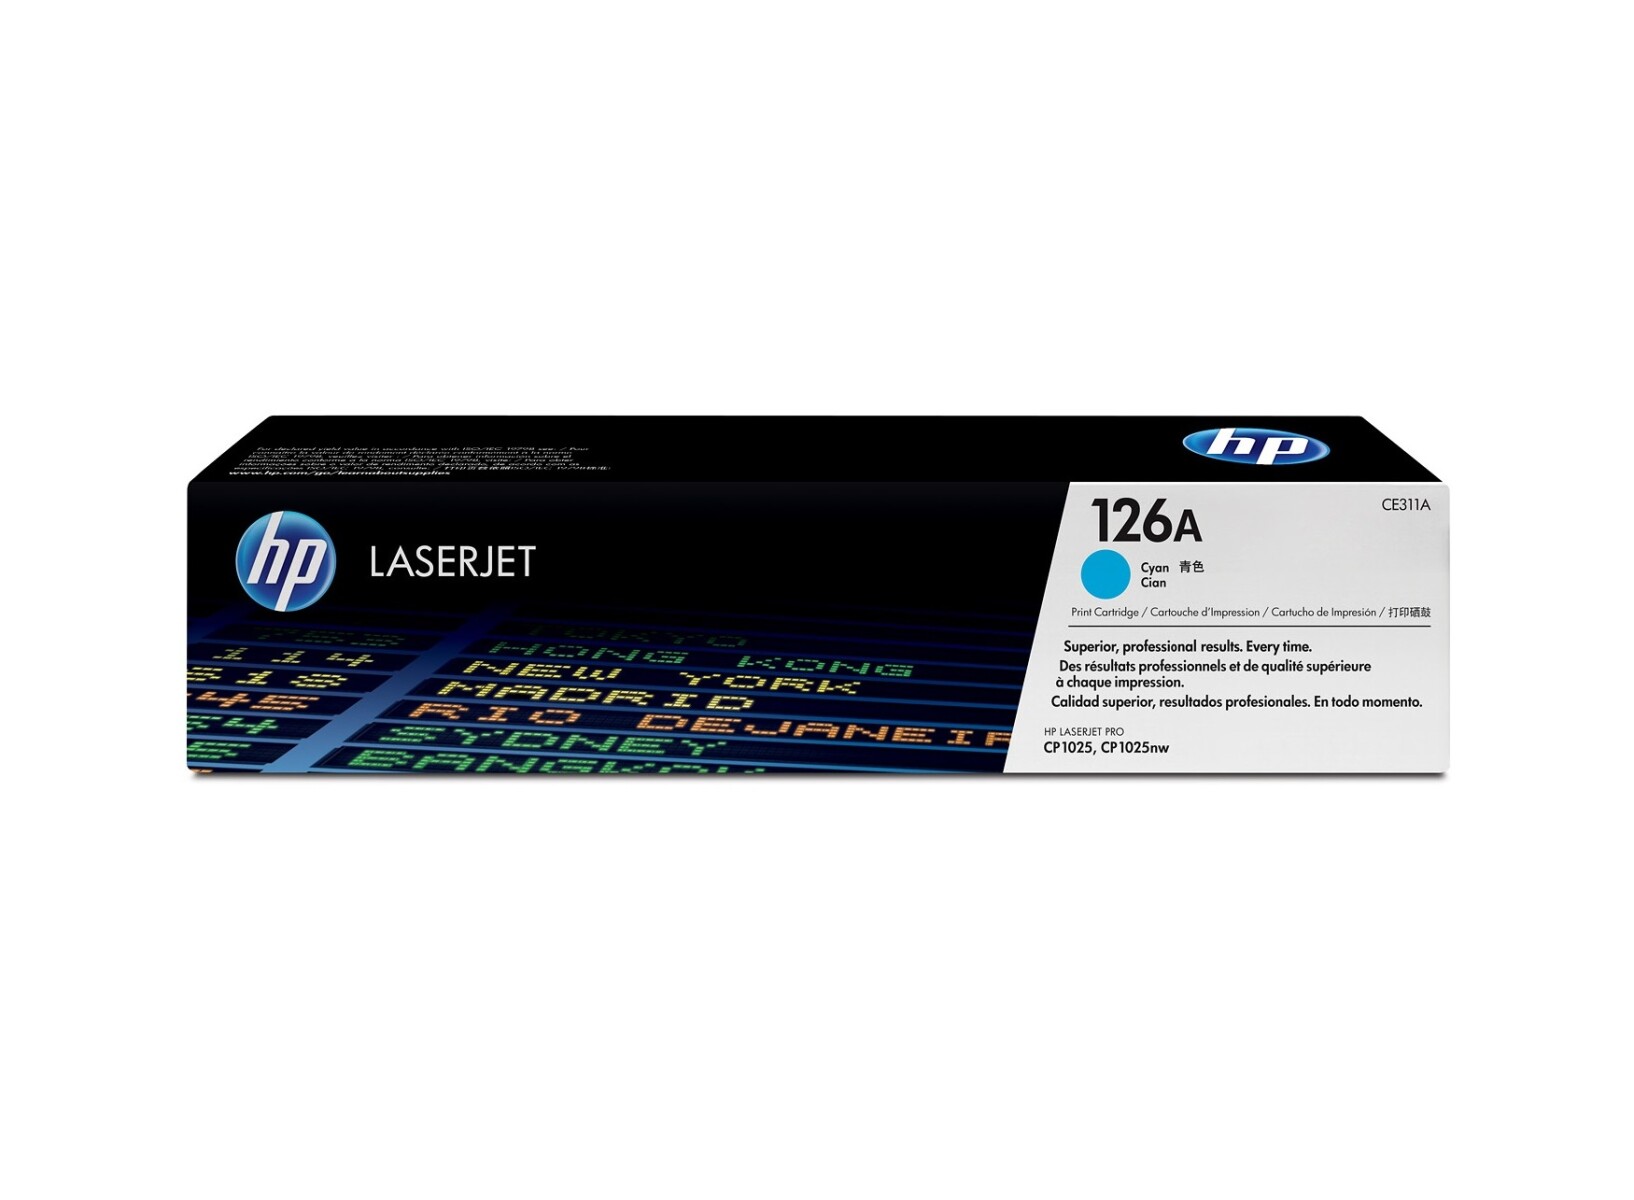 HP TONER CE311A CYAN 126A CP1000/1025NW/M175NW 1000CPS - Hp Toner Ce311a Cyan 126a Cp1000/1025nw/m175nw 1000cps 